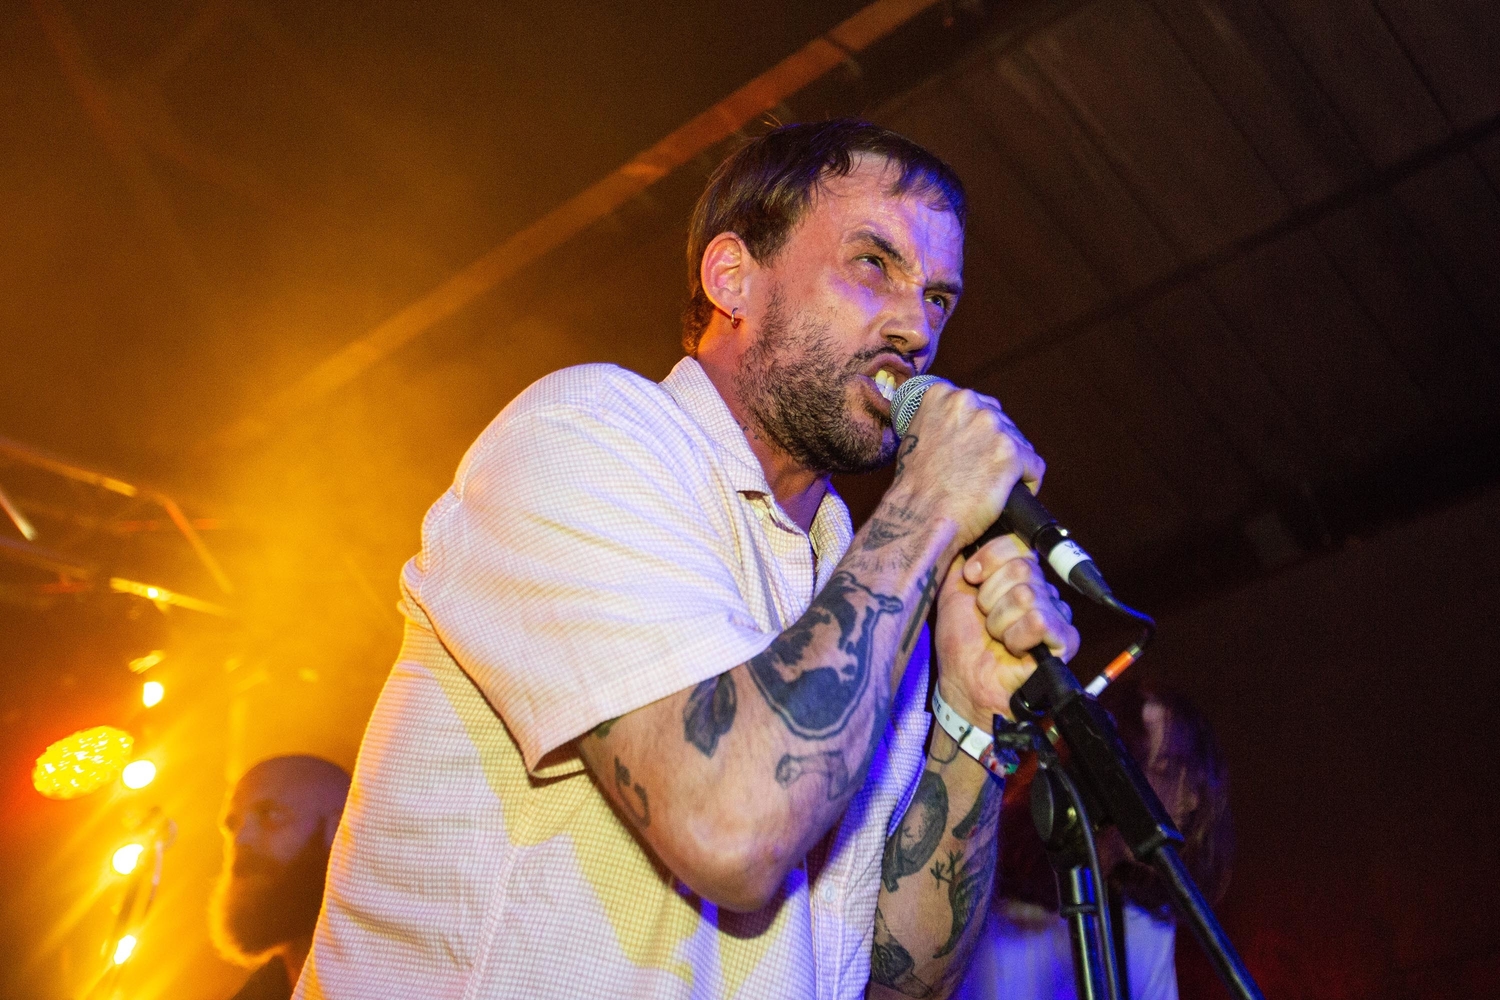 IDLES, Ghostpoet & loads more to play the DIY stage at Electric Fields 2018